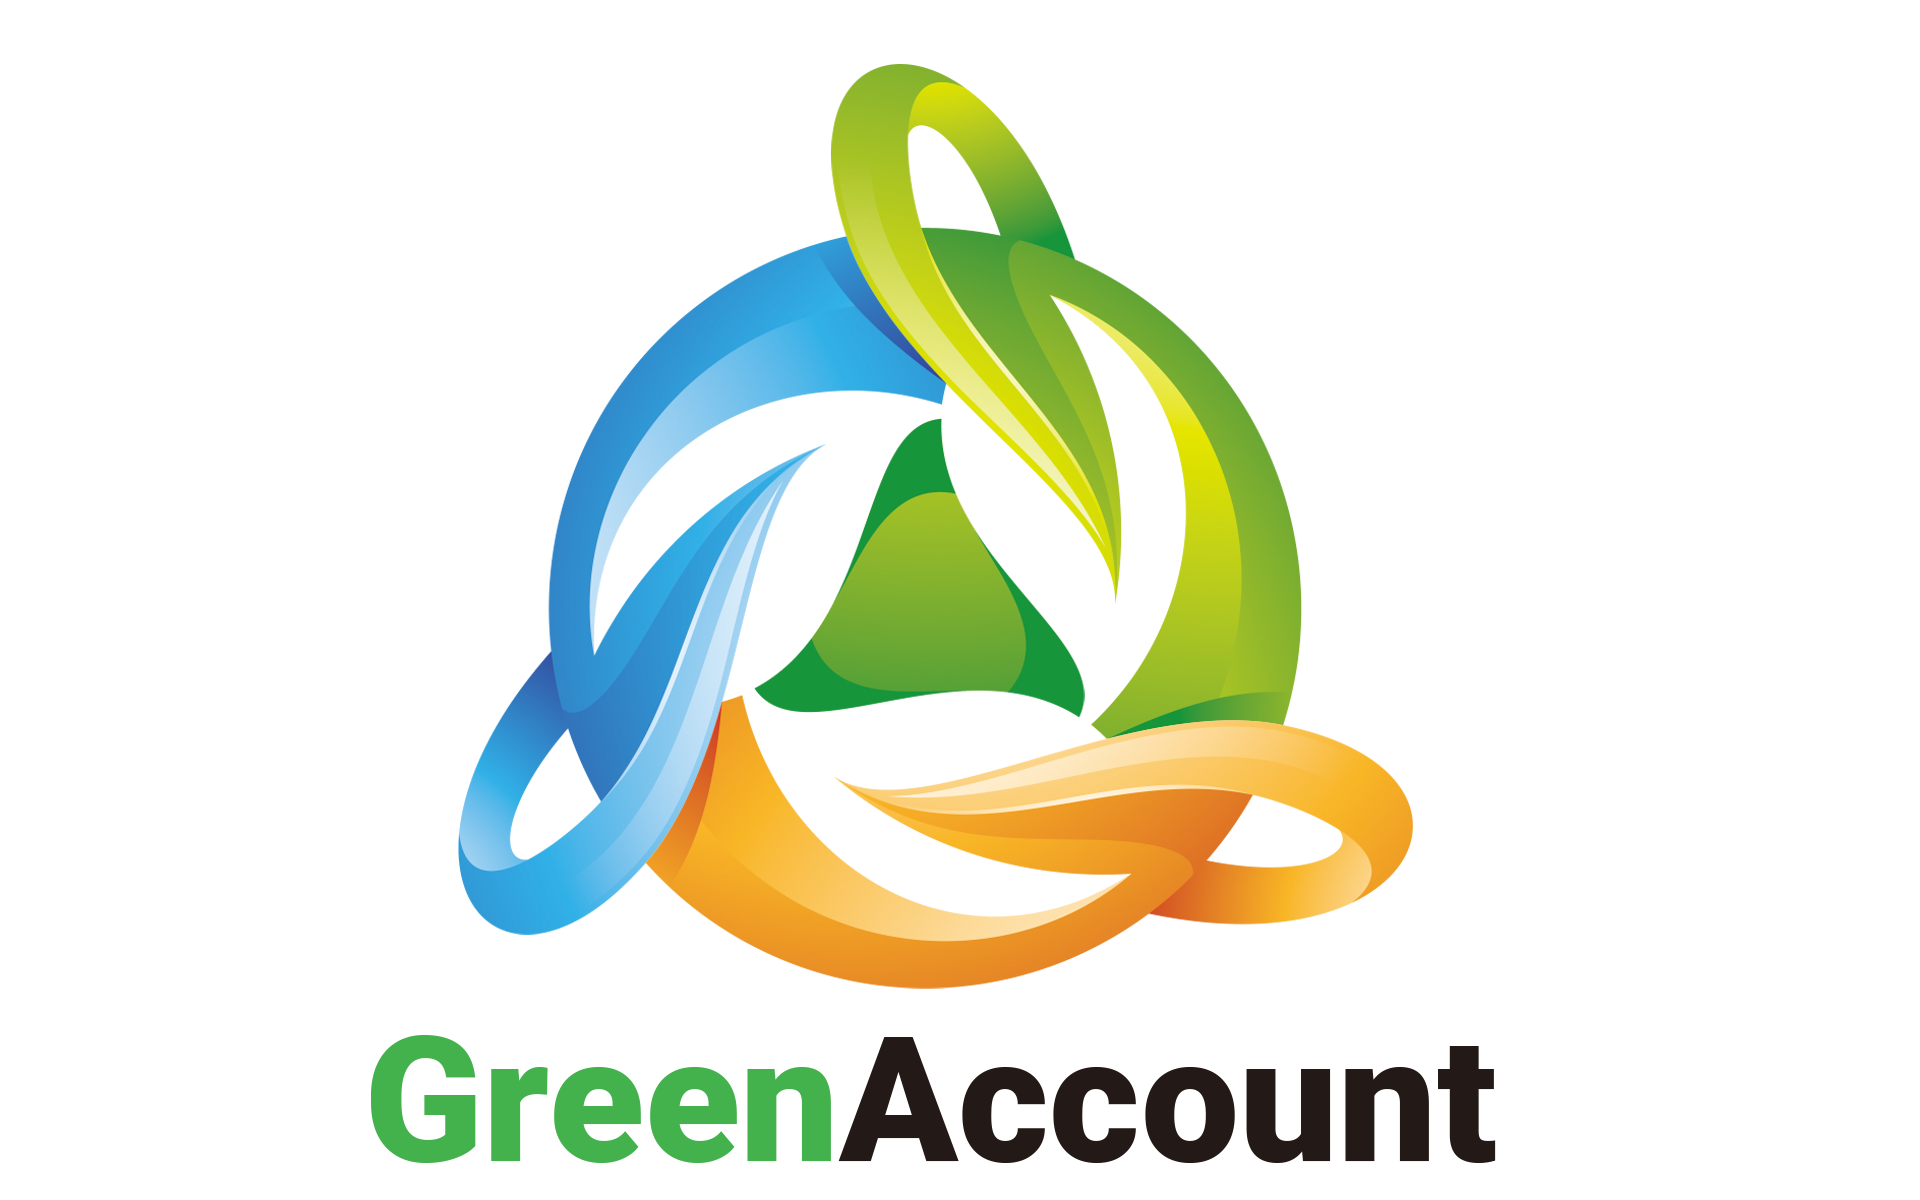 The Green Accounting